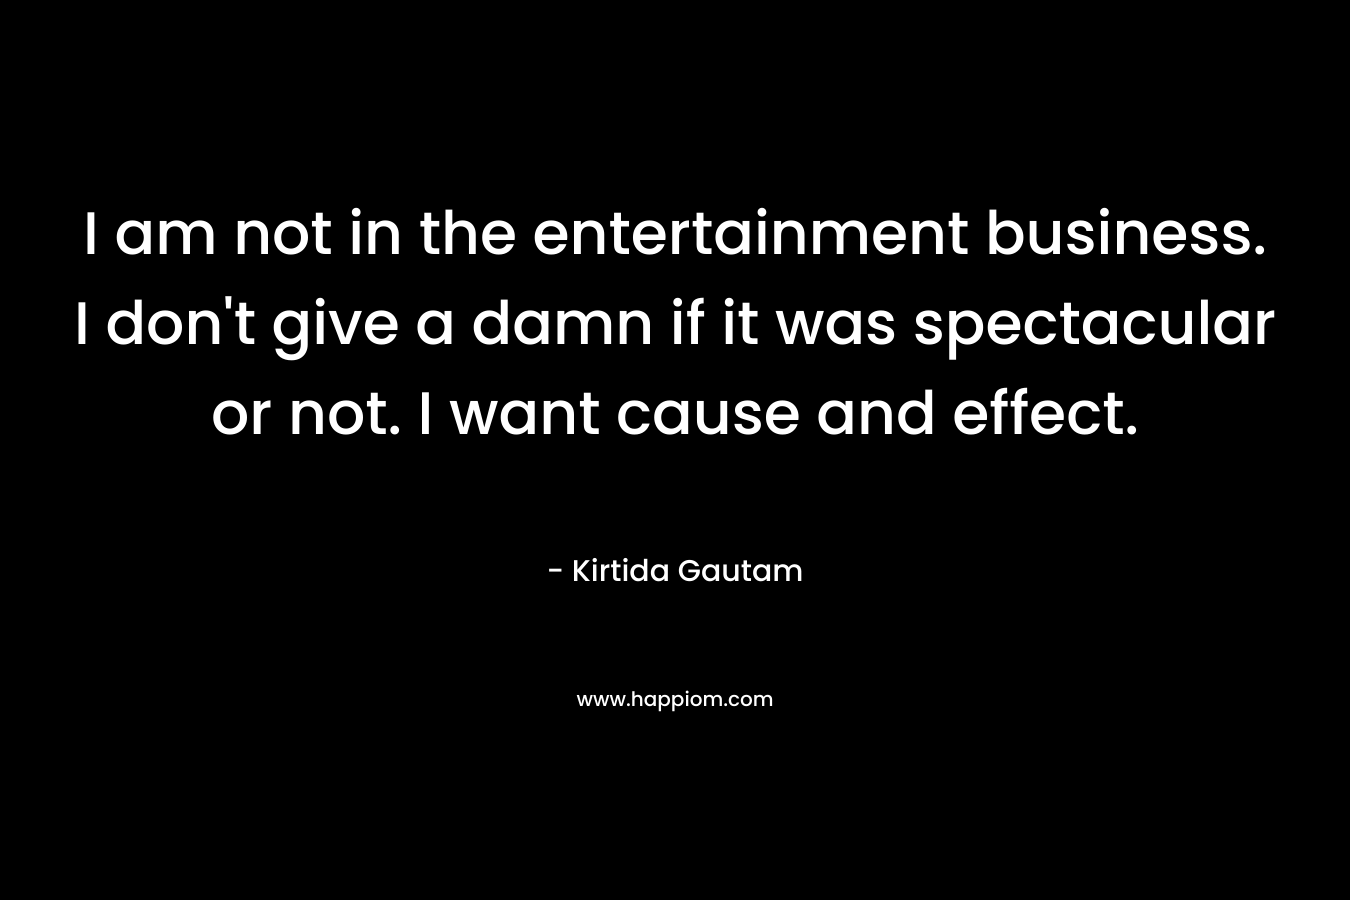 I am not in the entertainment business. I don't give a damn if it was spectacular or not. I want cause and effect.